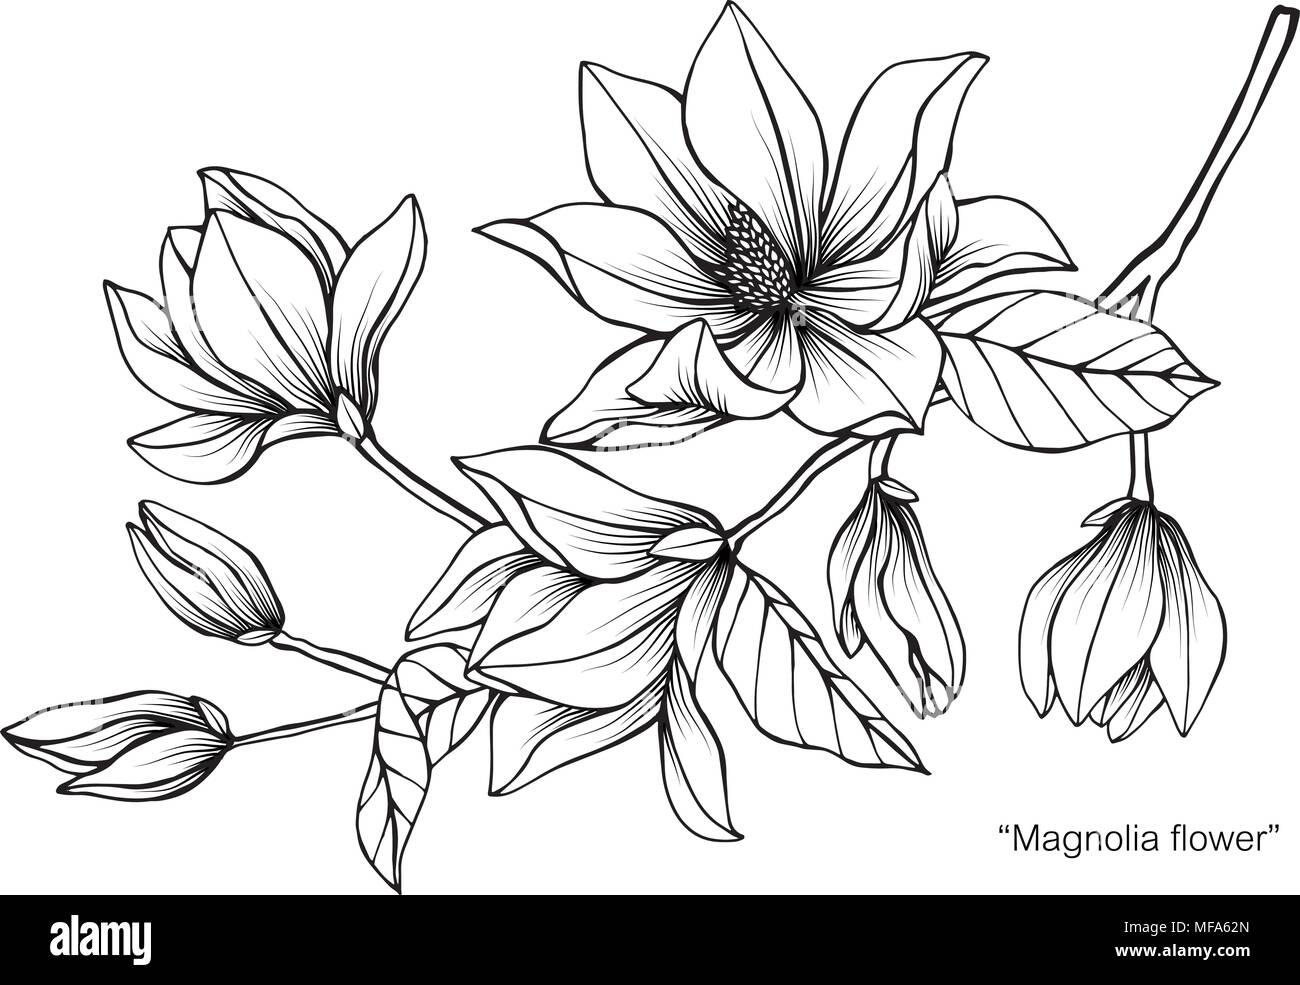 Magnolia flower drawing illustration. Black and white with line art on